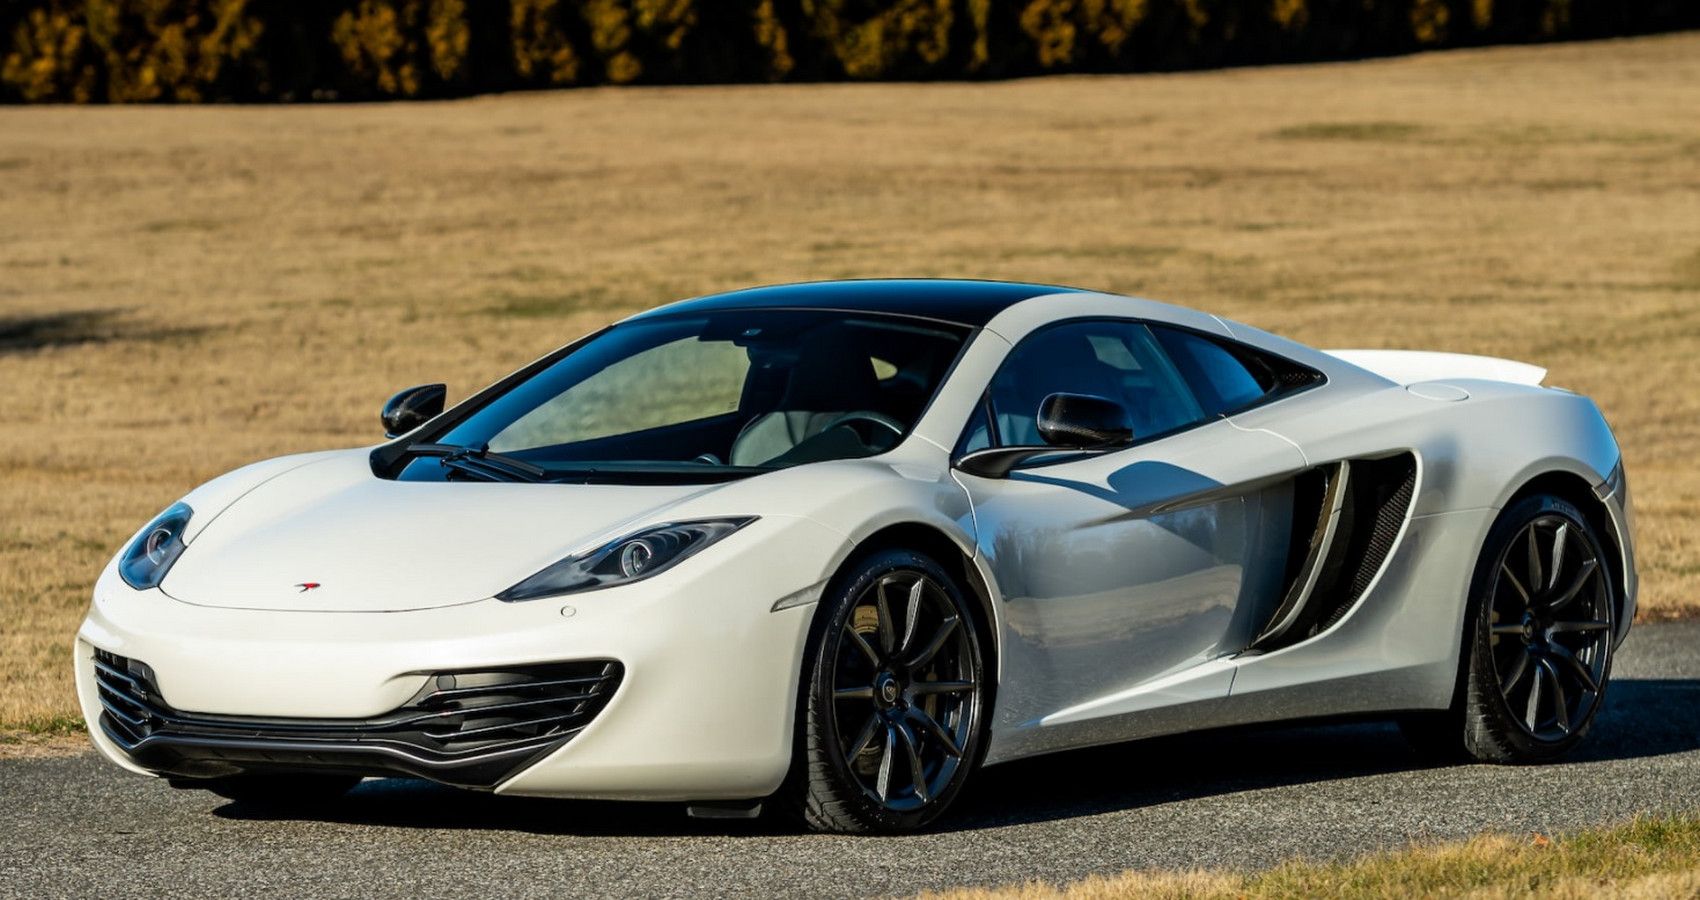 10 European Sports Cars We Wouldn't Touch With A 10-Foot Pole